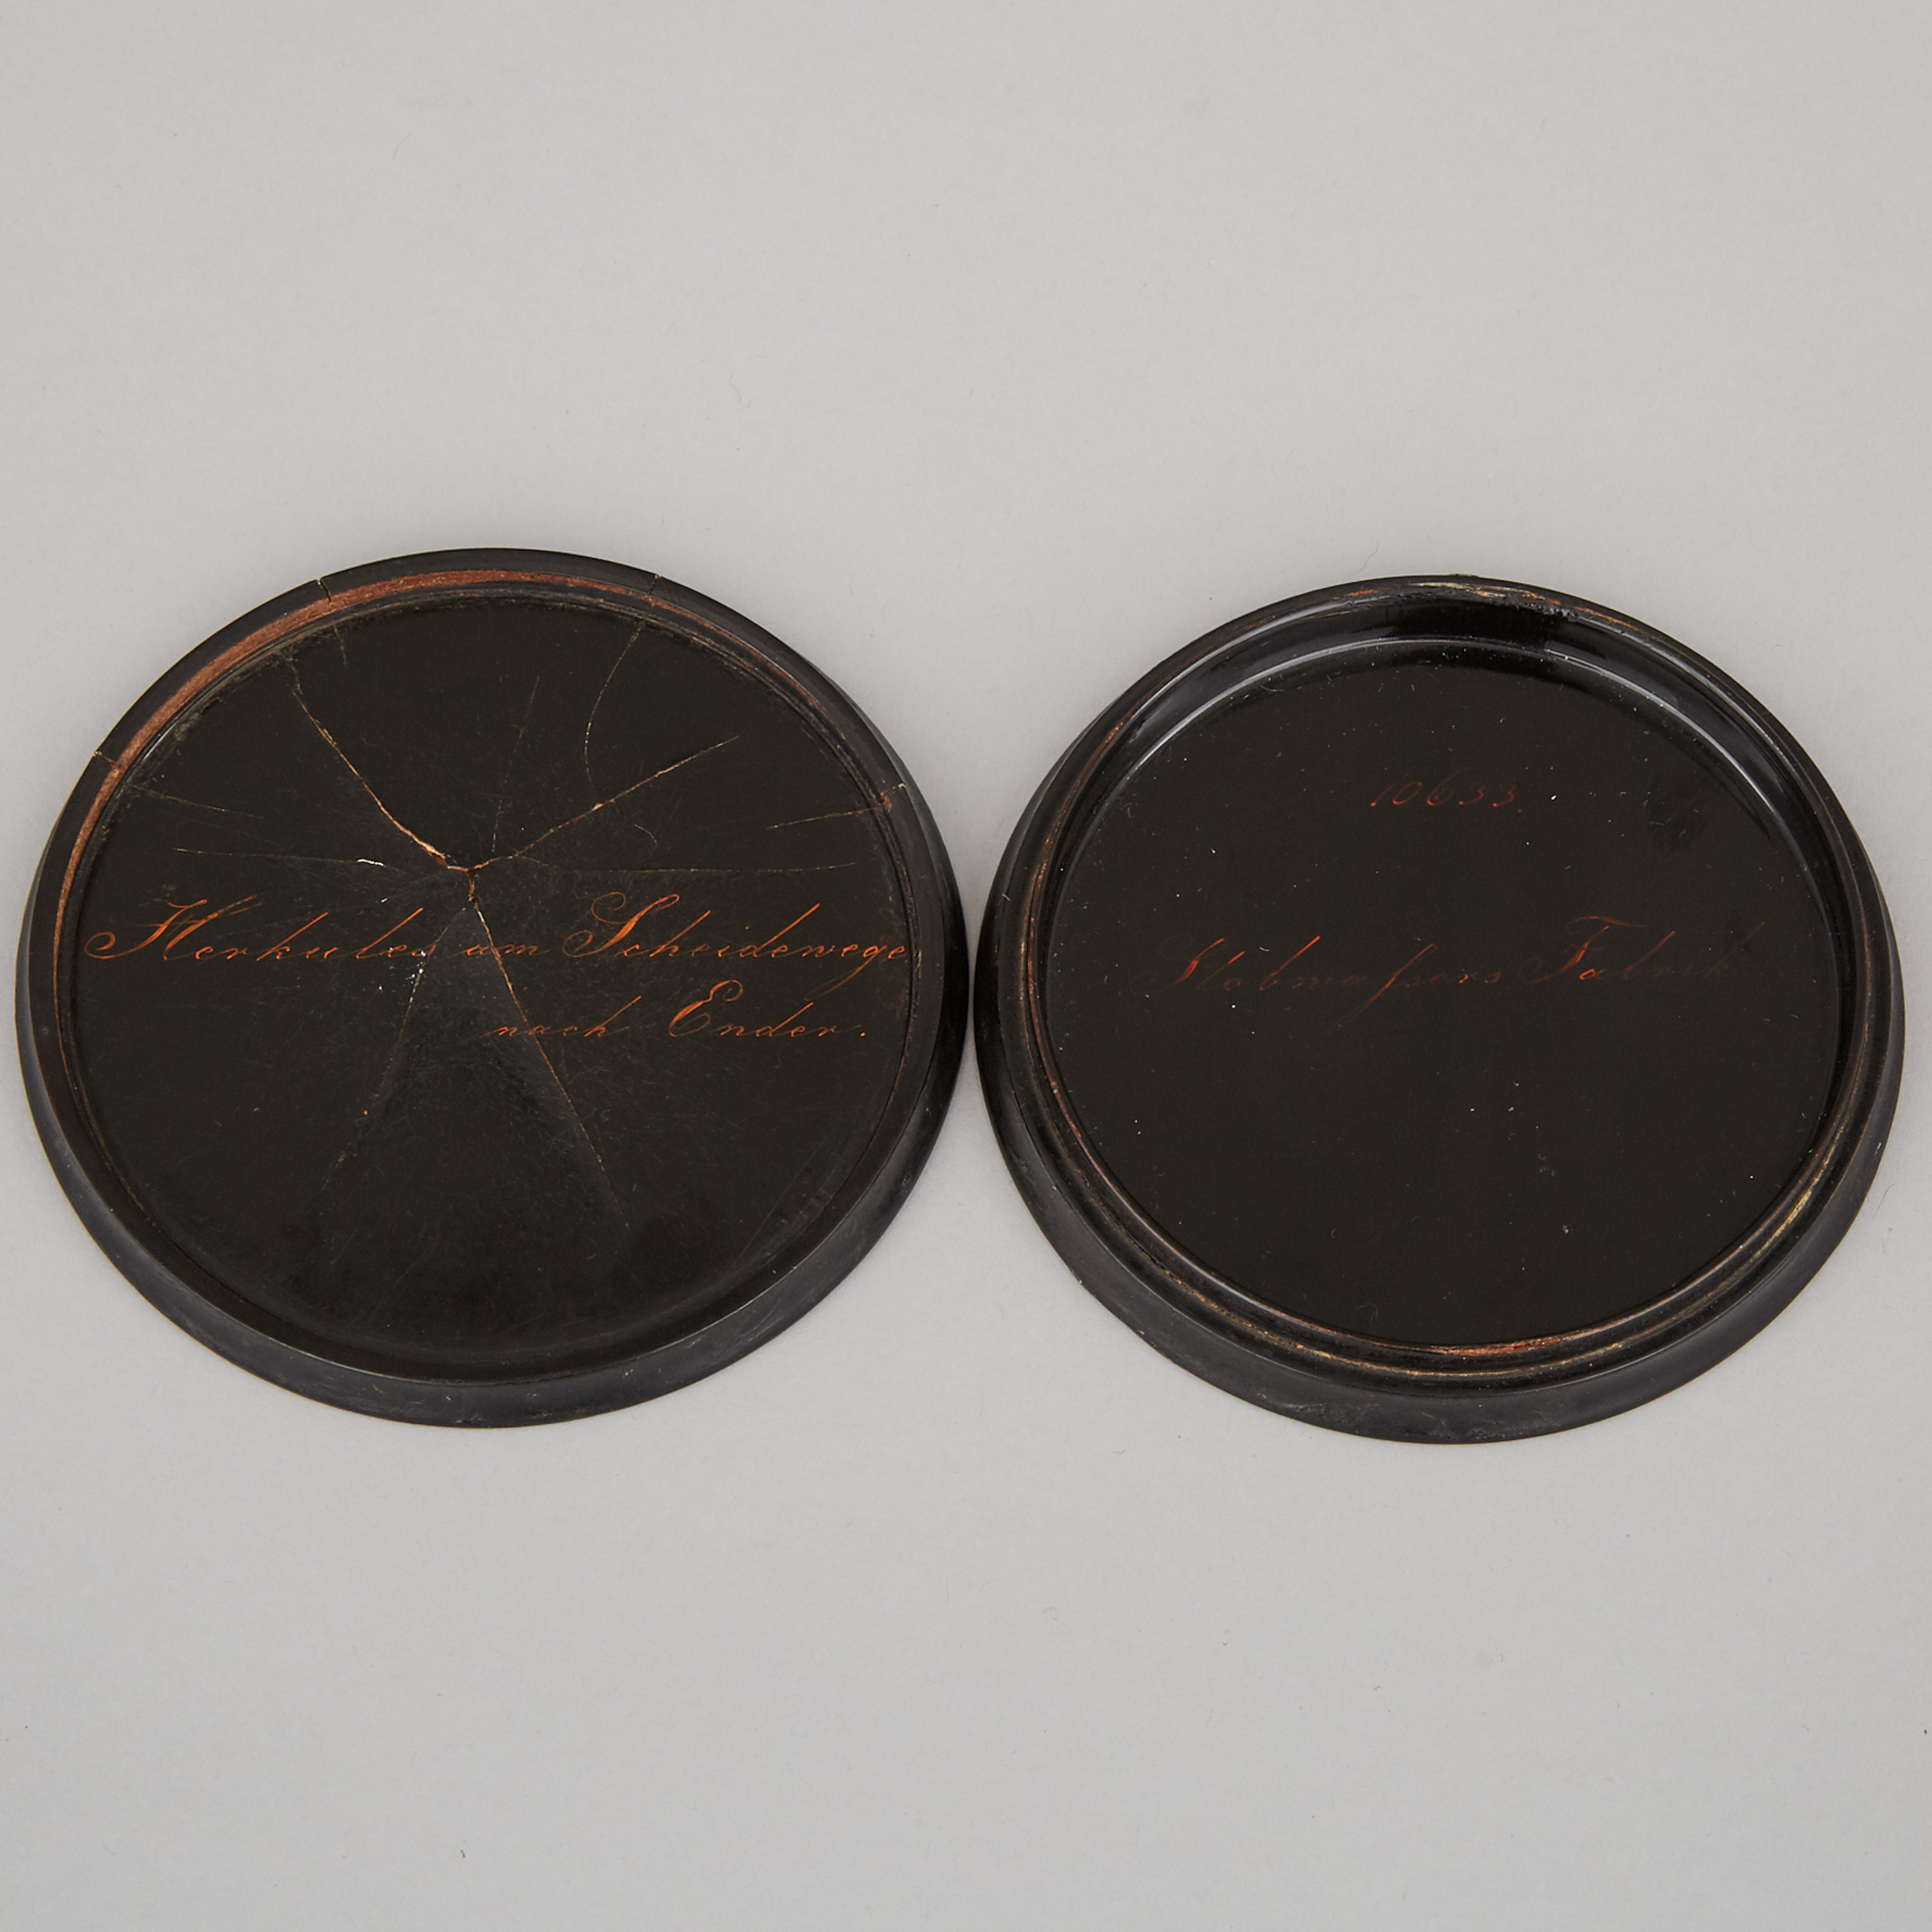 German Lacquer Neoclassical Snuff Box by Stobwasser, early 19th century